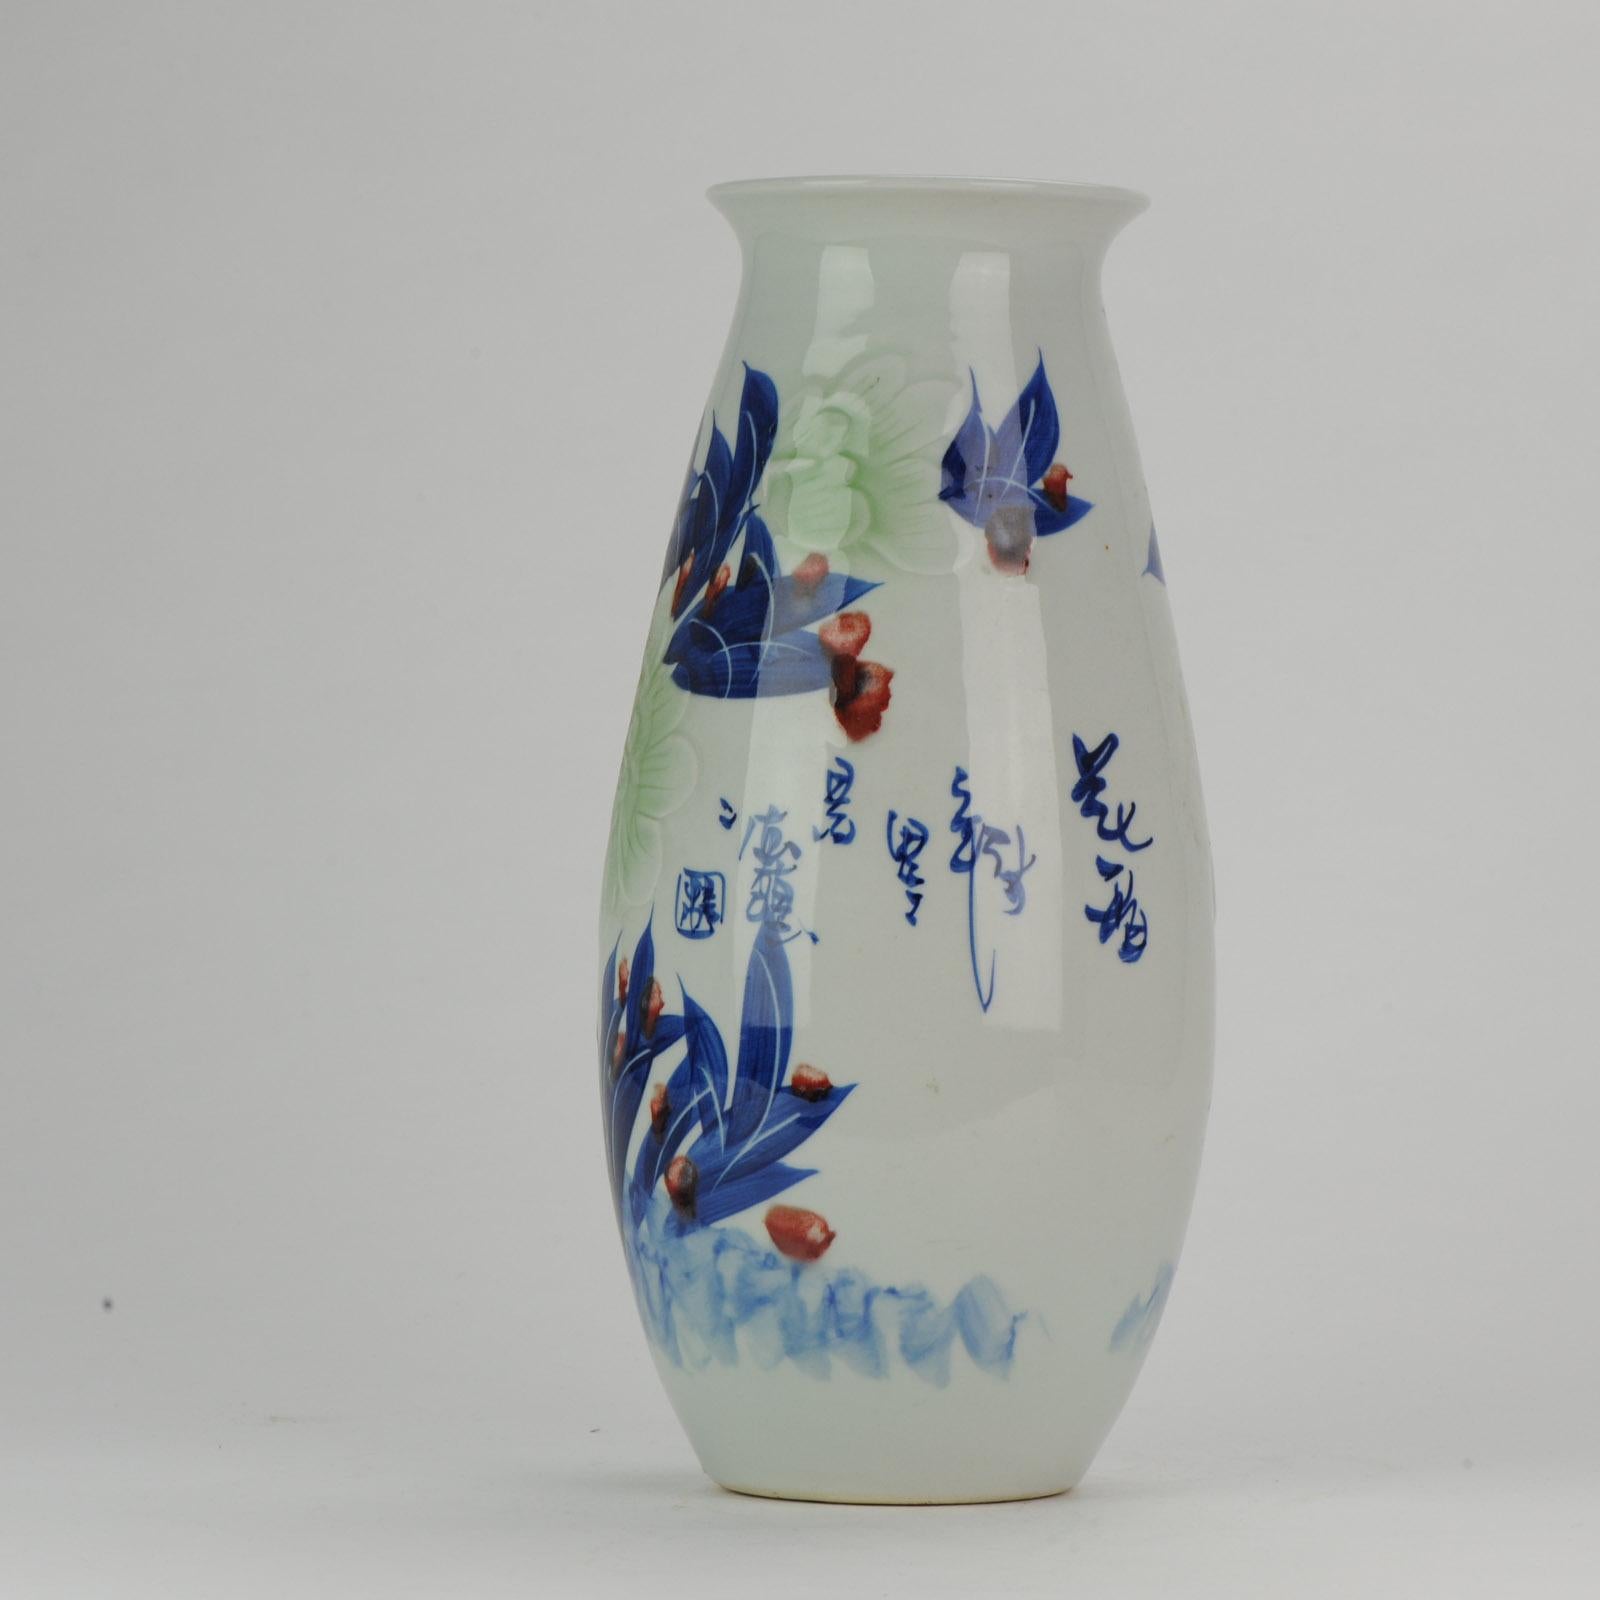 Perfect Chinese porcelain PRoC Vase Flowers Tulips Unusual Calligraphy In Excellent Condition For Sale In Amsterdam, Noord Holland